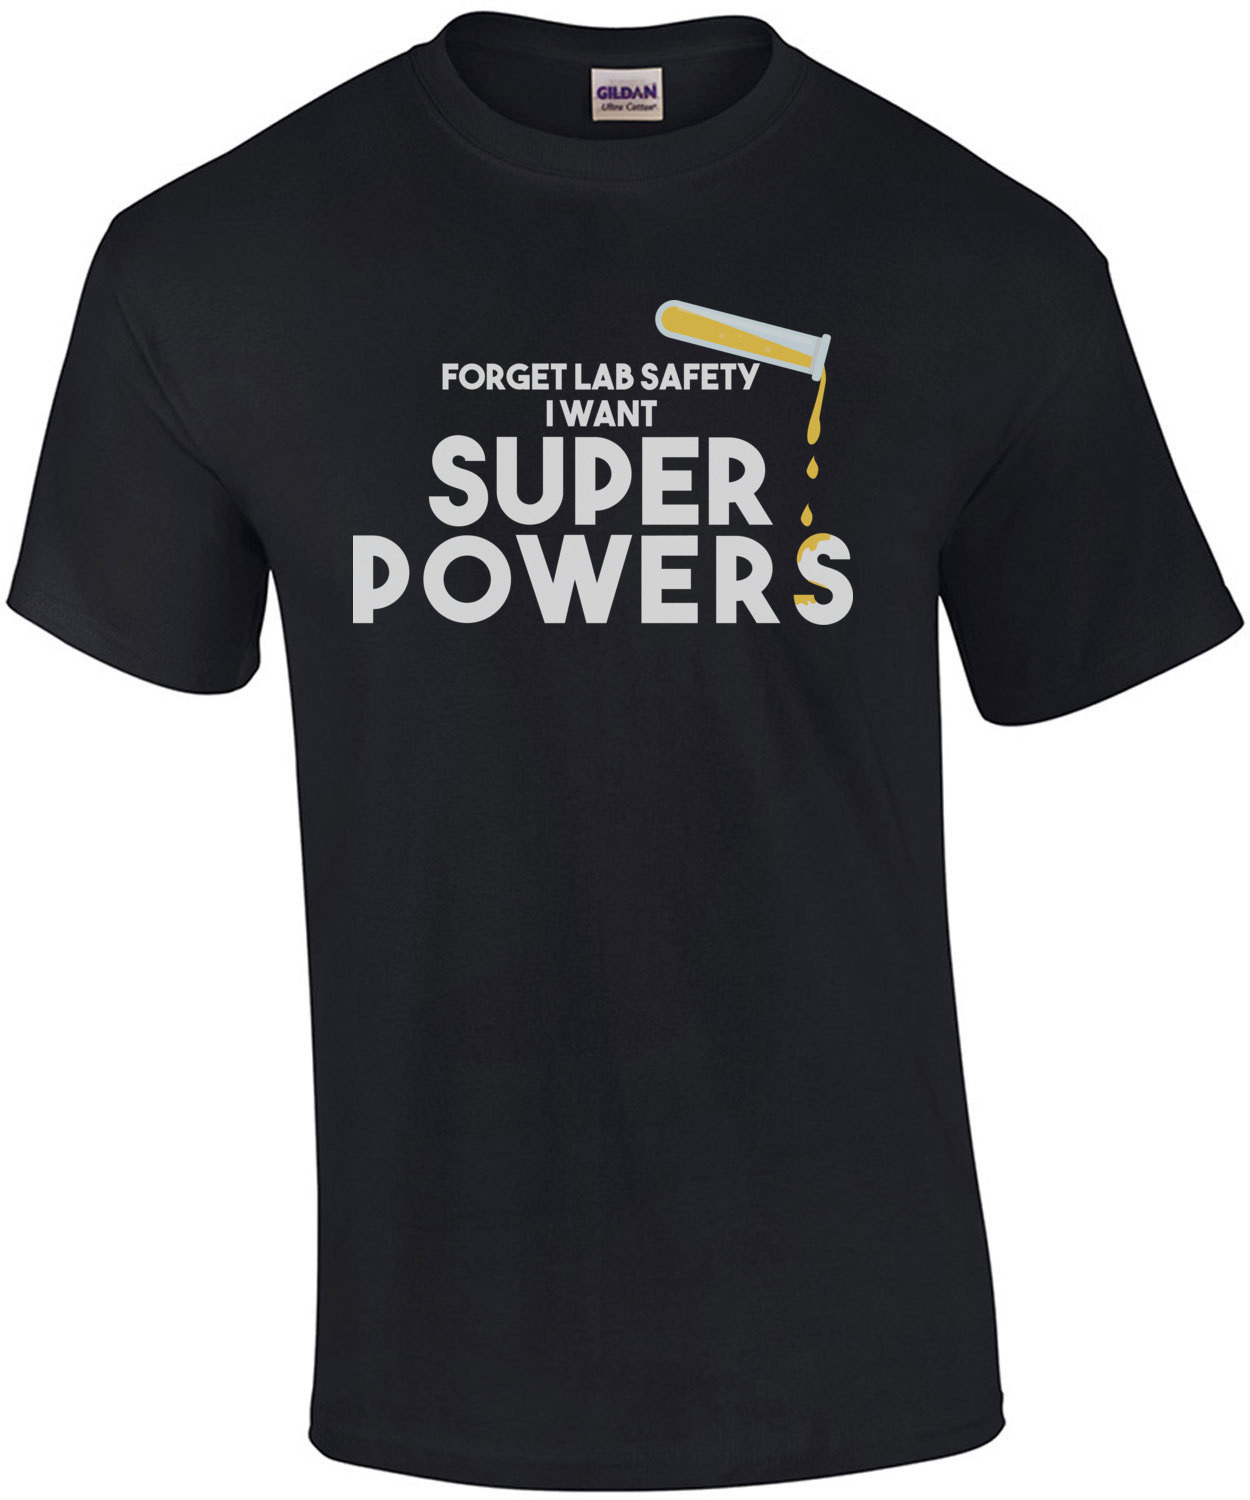 Forget lab safety I want super powers - funny science t-shirt